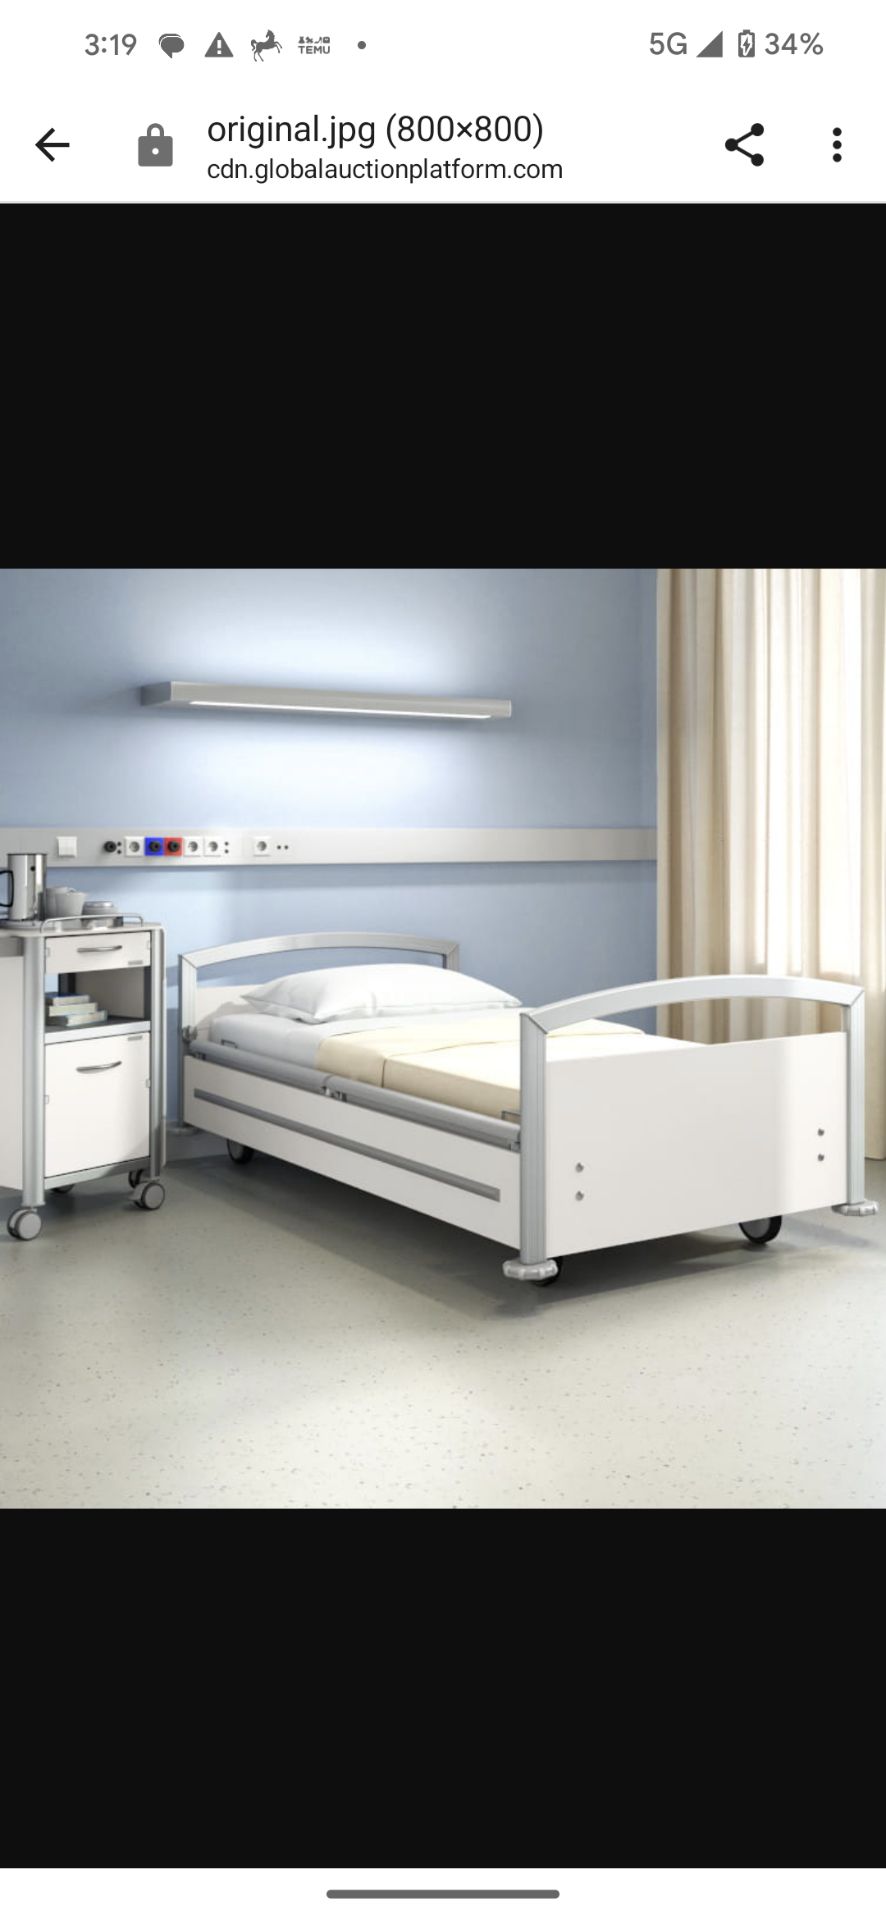 4 x Wissner Bosserhof Sentida 6 Electric Fully Adjustable Hospital Beds With Pressure Mattresses - Image 2 of 5